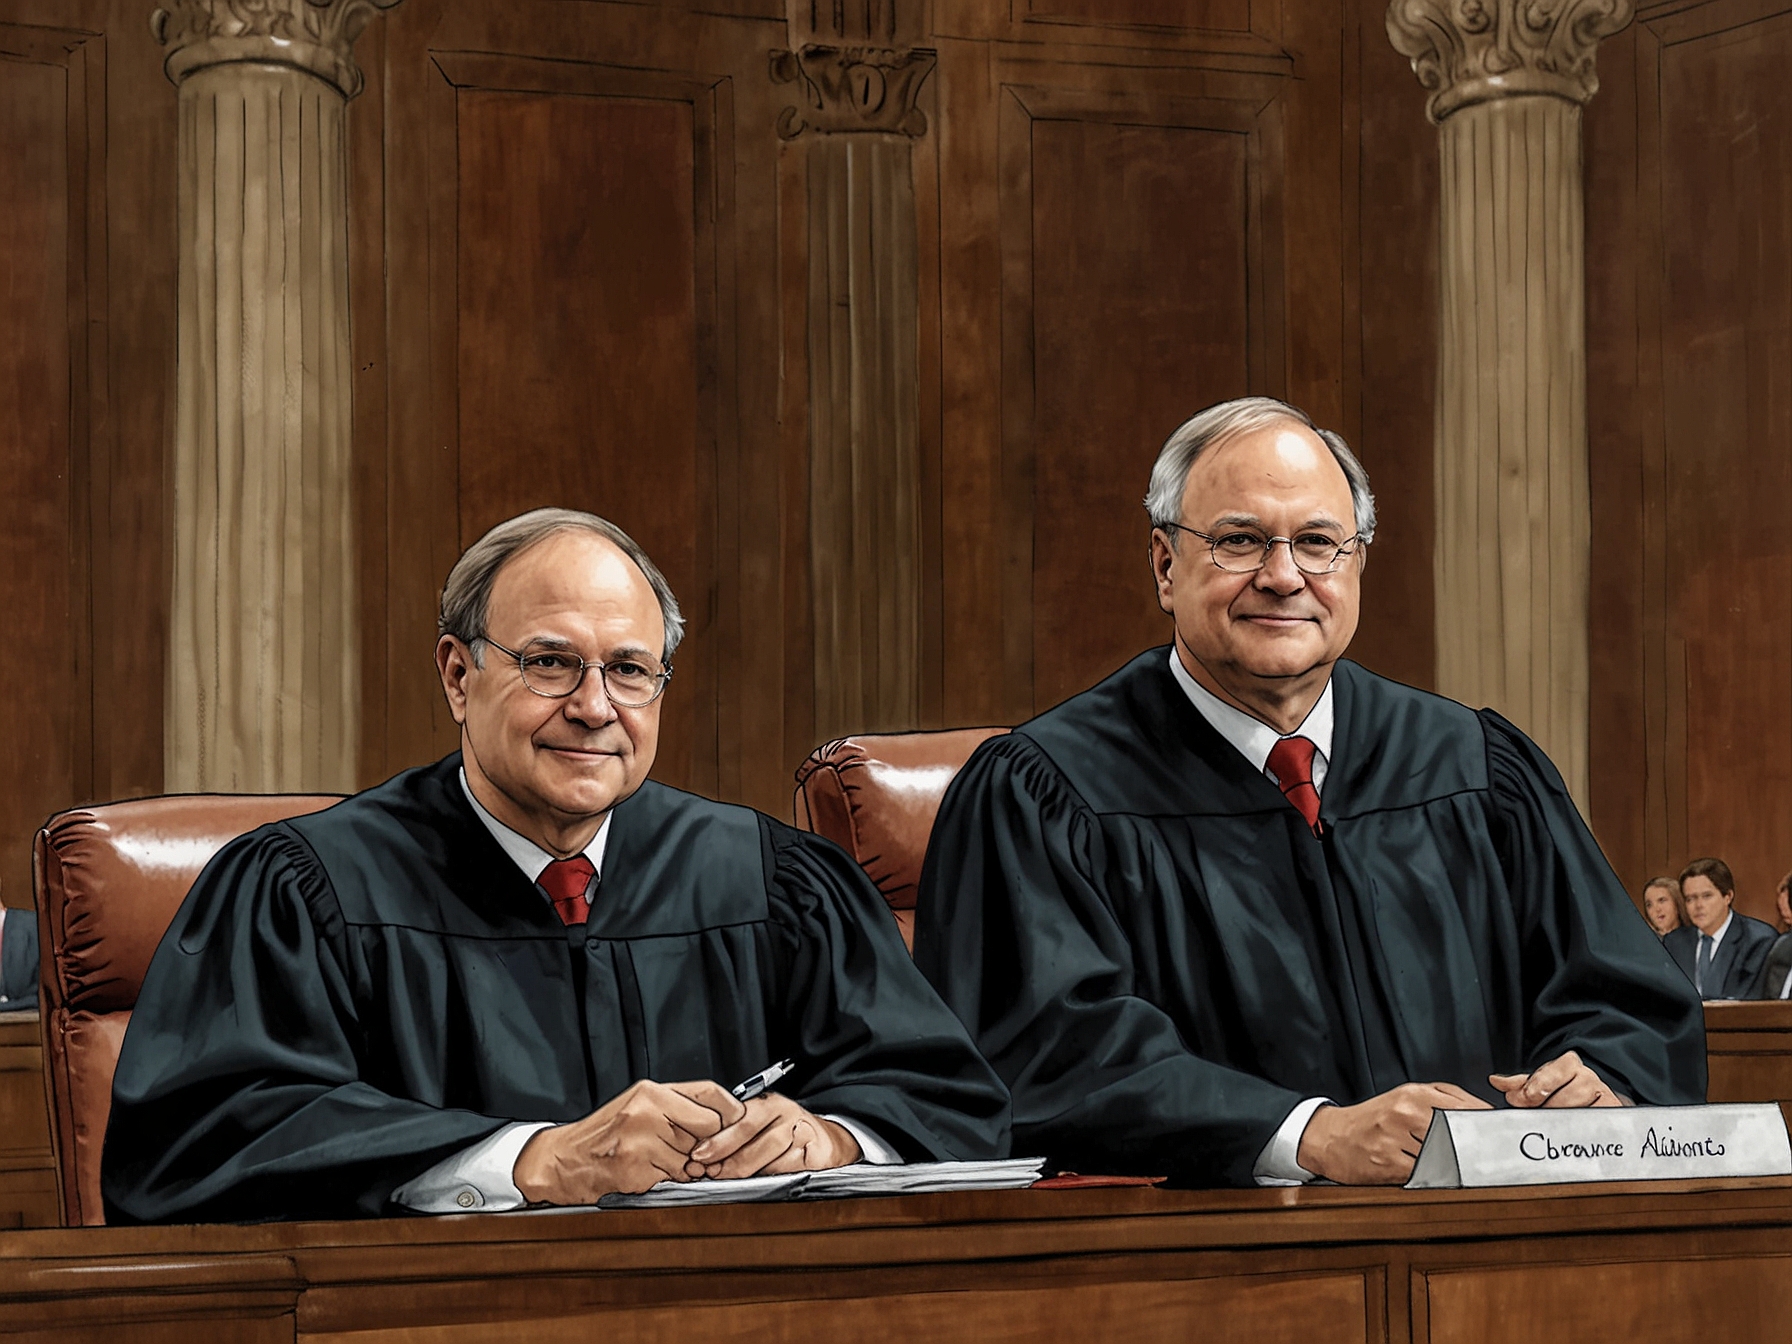 Justices Samuel Alito and Clarence Thomas seated during a Supreme Court session, symbolizing the conservative presence in the judiciary that Senator Graham argues is under attack by Democrats.